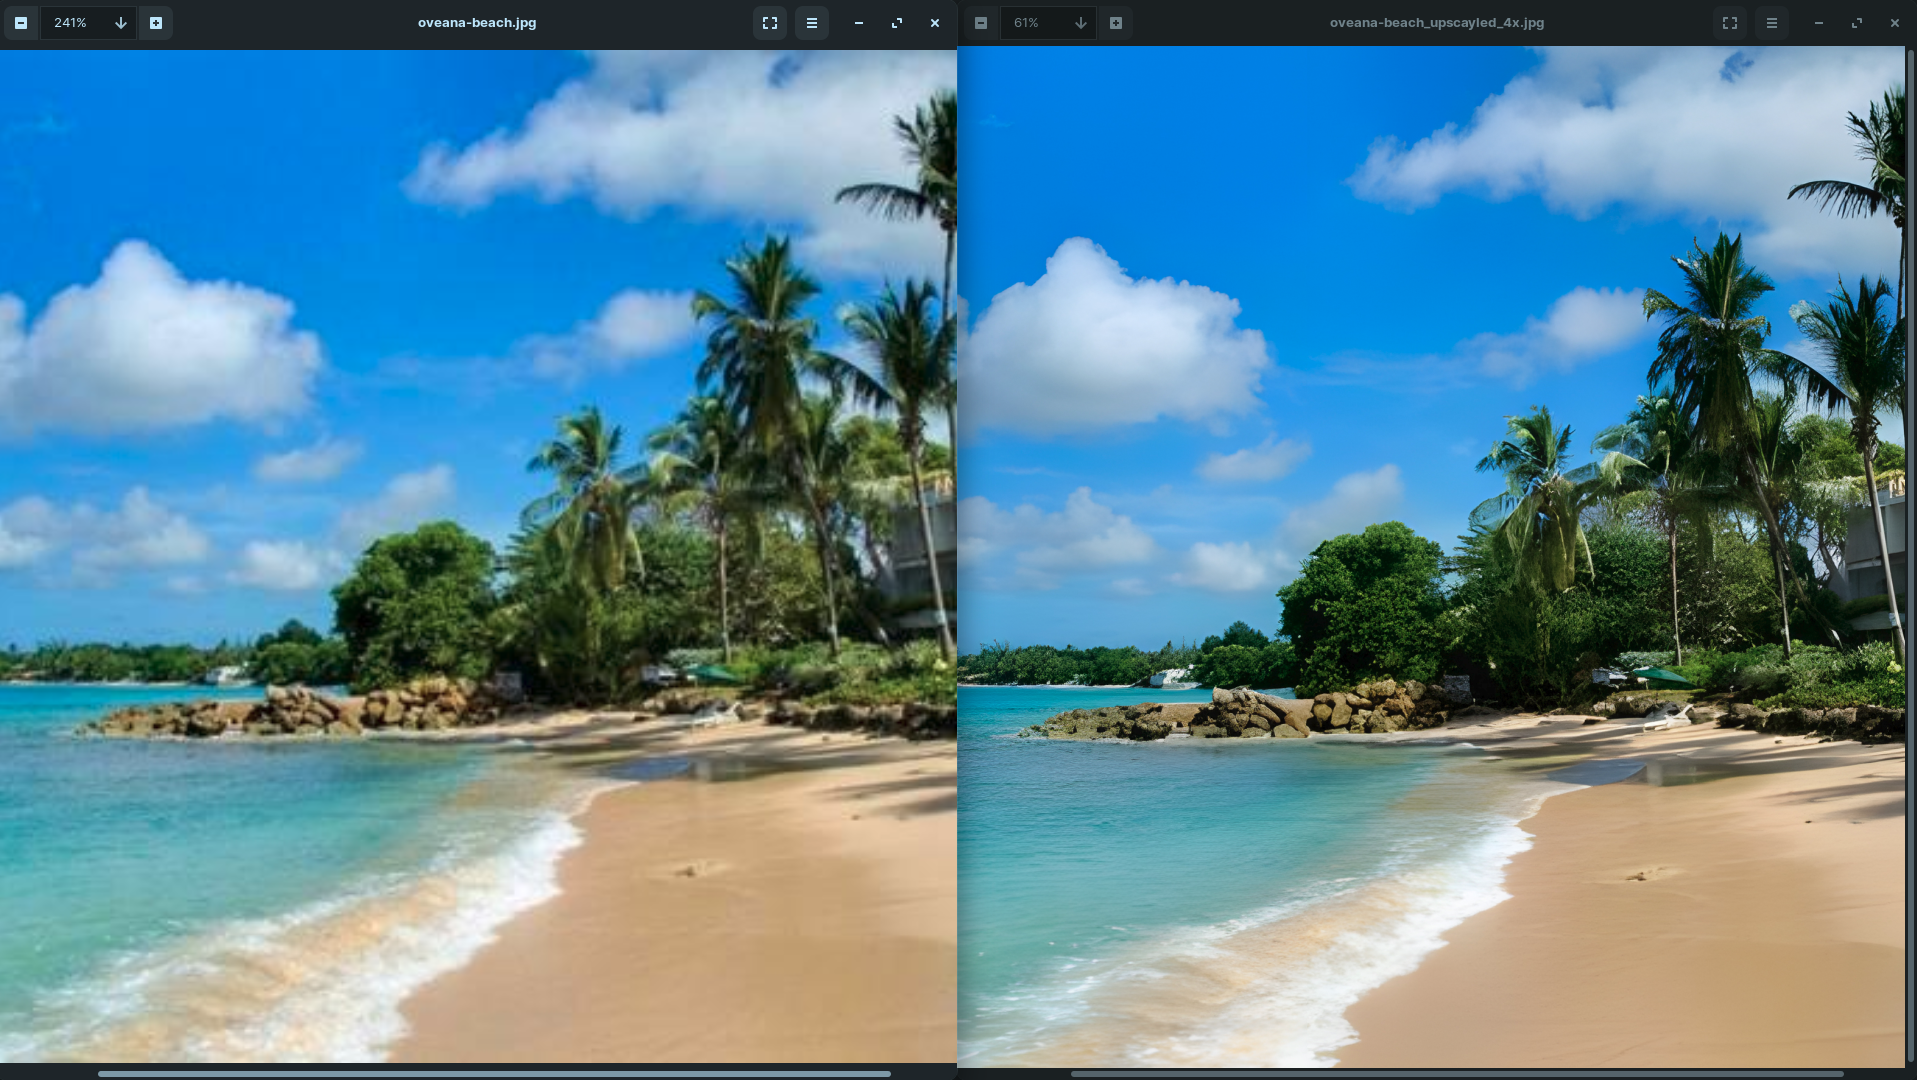 How to Clean Up Pictures Part 1: Upscaling & Sharpening